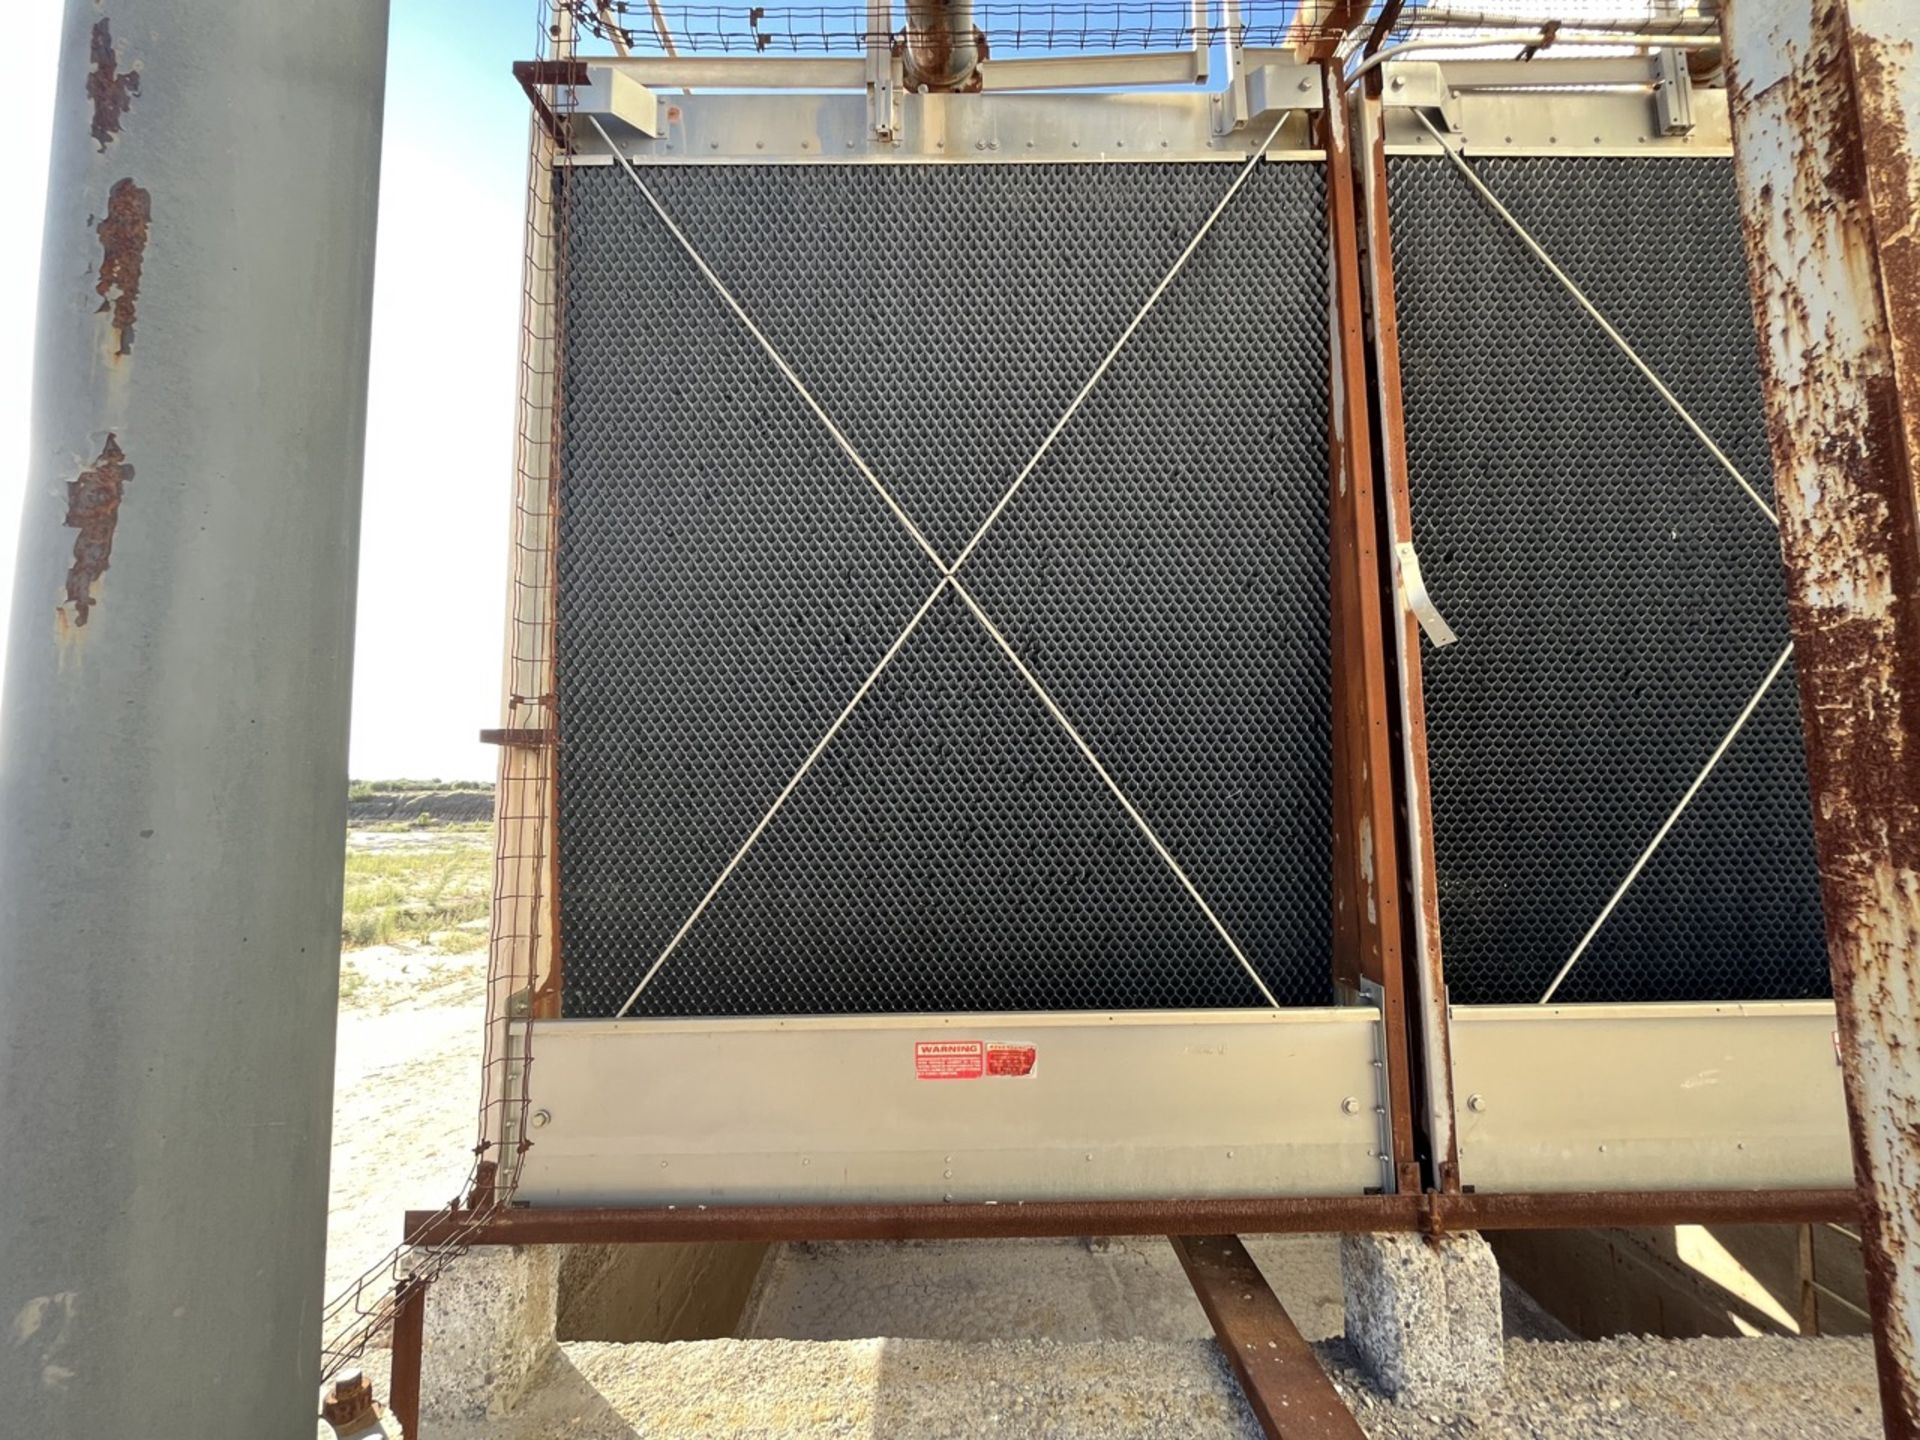 SPX Marley Cooling Tower, Model NC8403TAN2BGF, Series 10090866-A1-NC8403BG-14, Year 2009; 1-cell 25 - Image 5 of 20